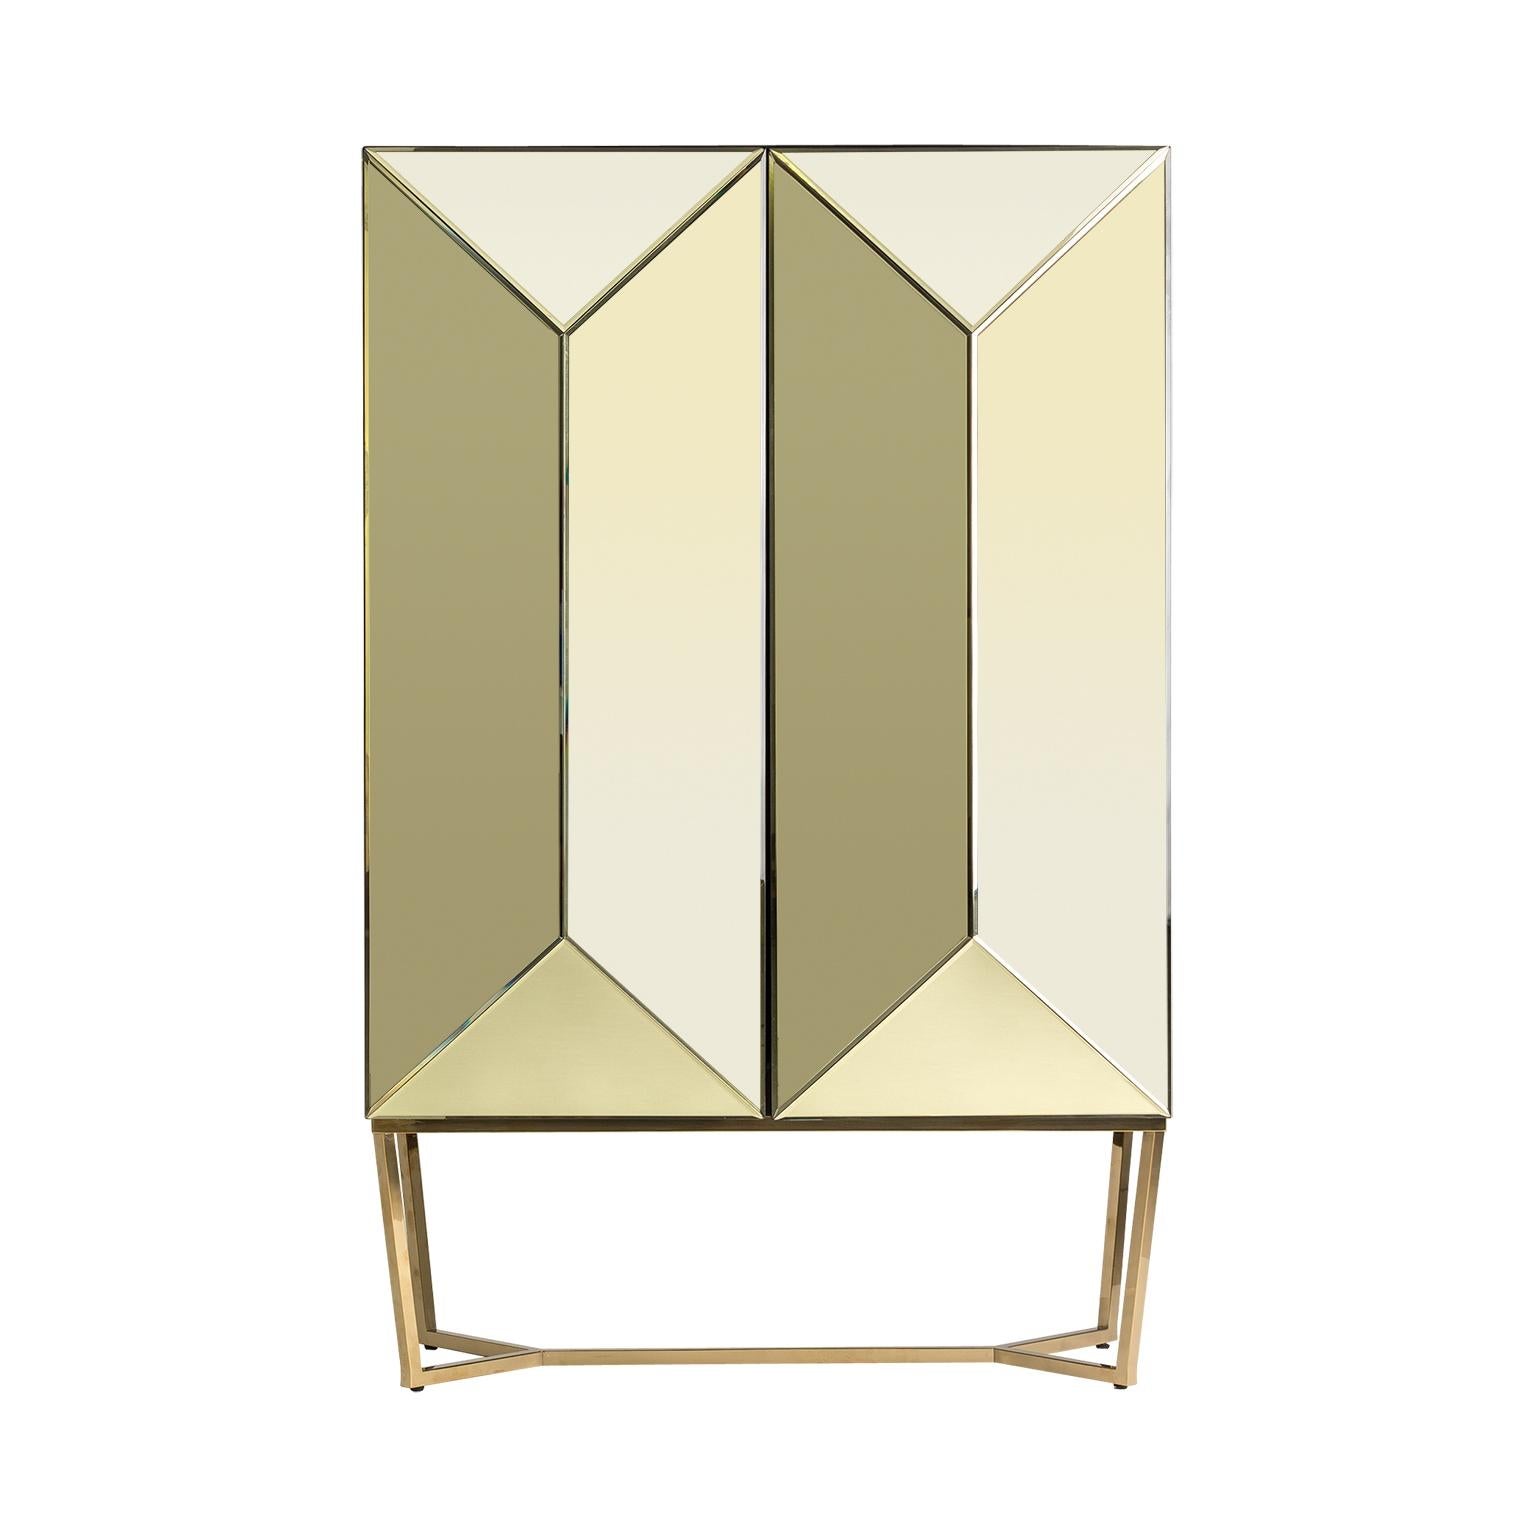 Gold bevelled mirror and gilded metal feet bar cabinet sparkling and sophisticated in an Art Deco style.